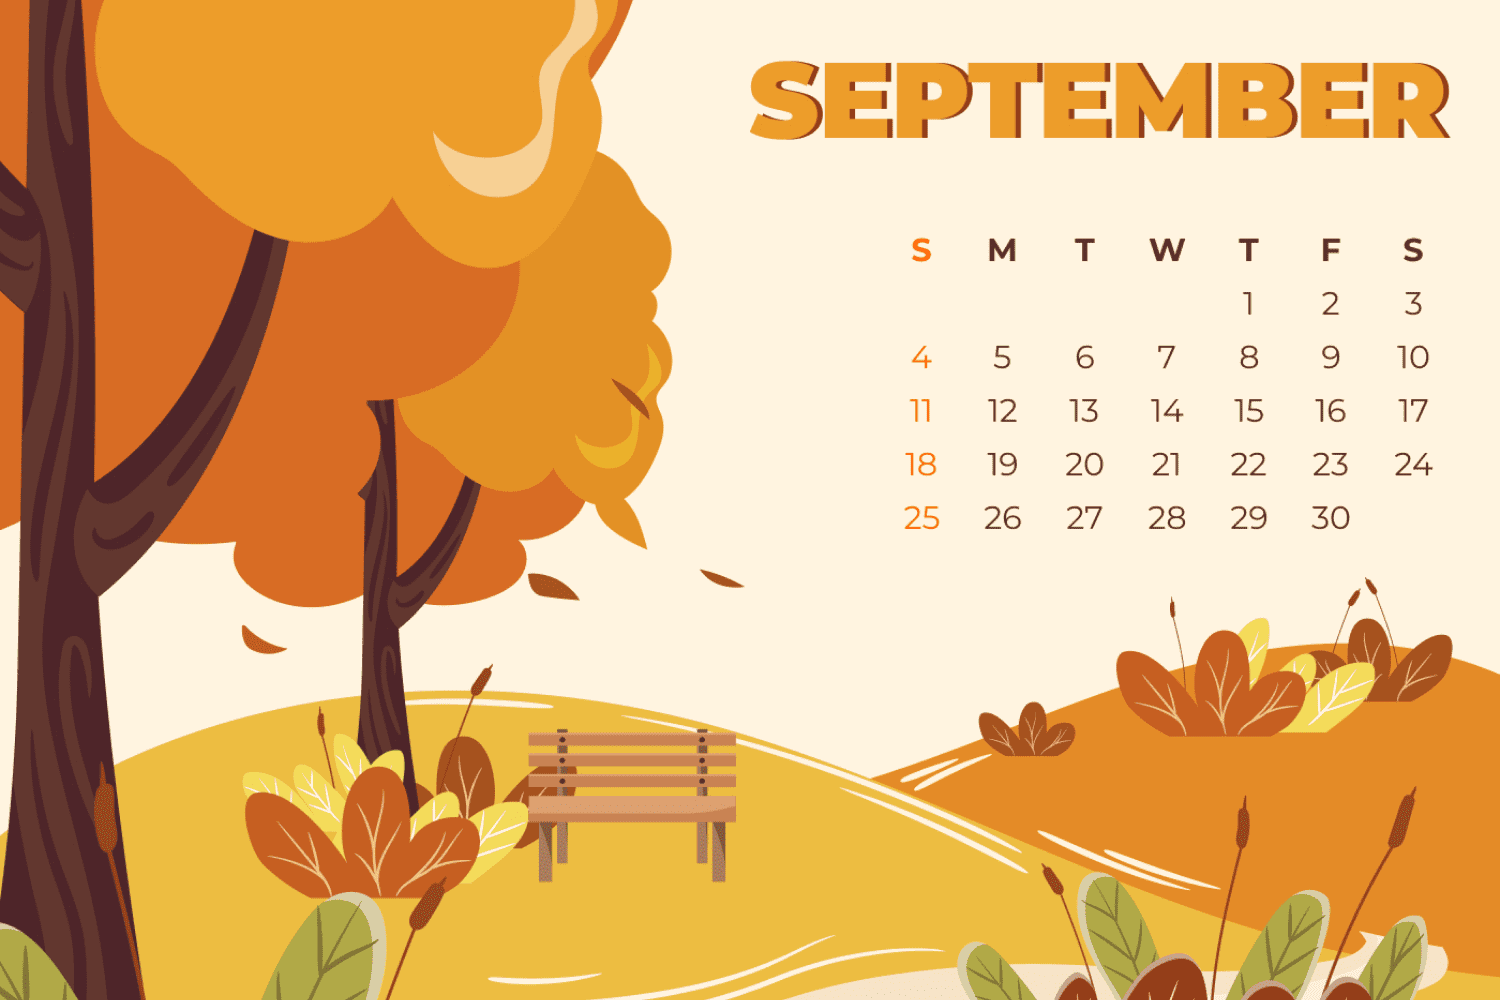 "Welcome September! It's time to celebrate the start of a new season."